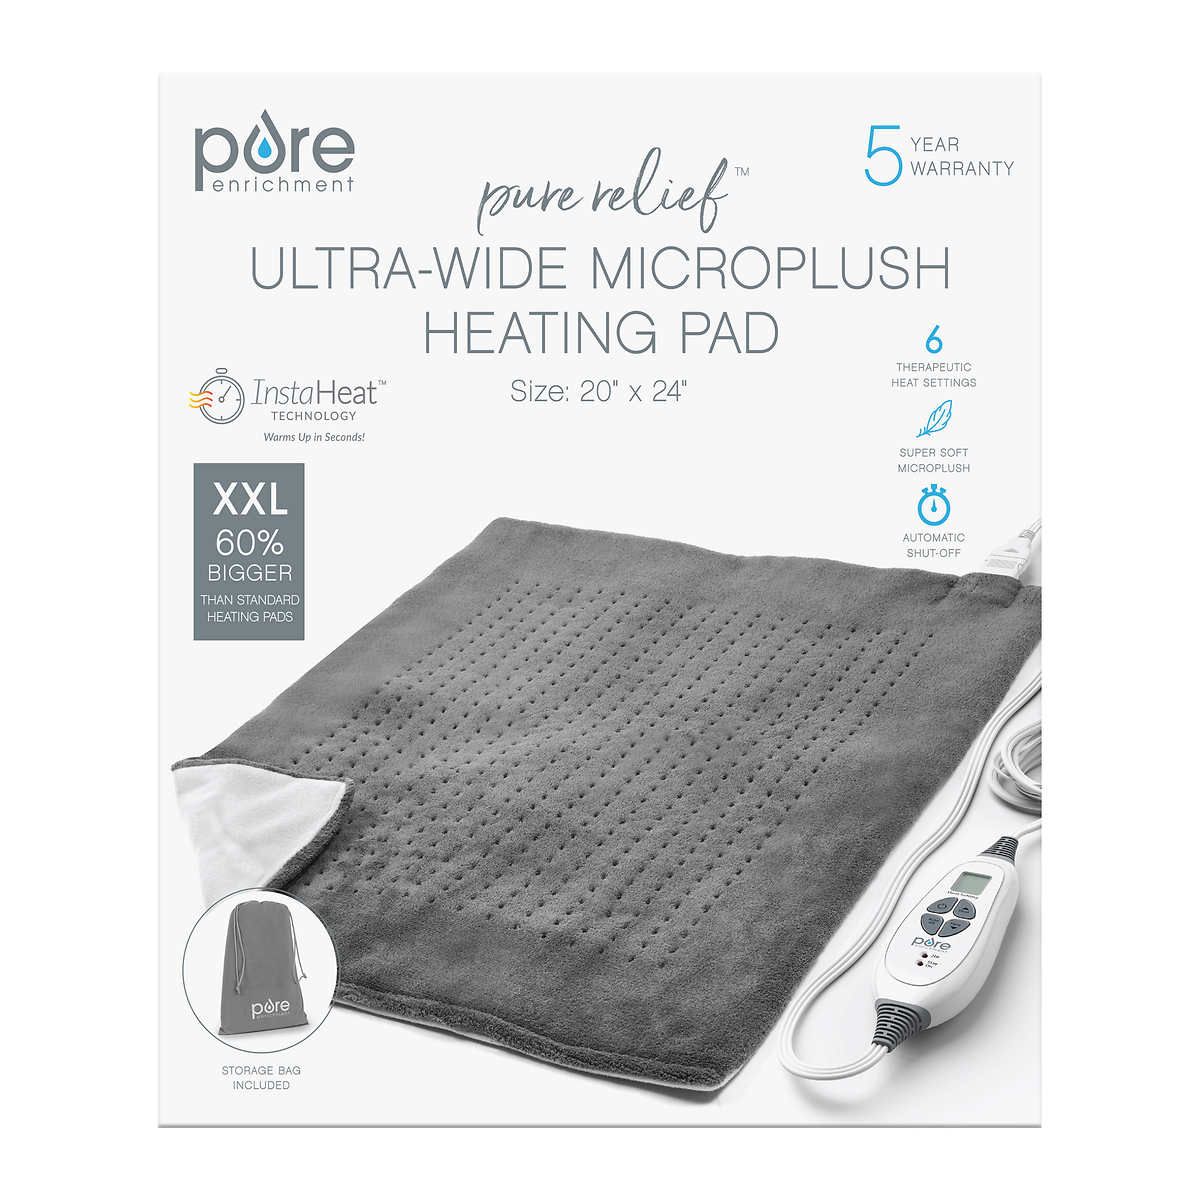 Pure Enrichment Ultra Wide Microplush Heating Pad